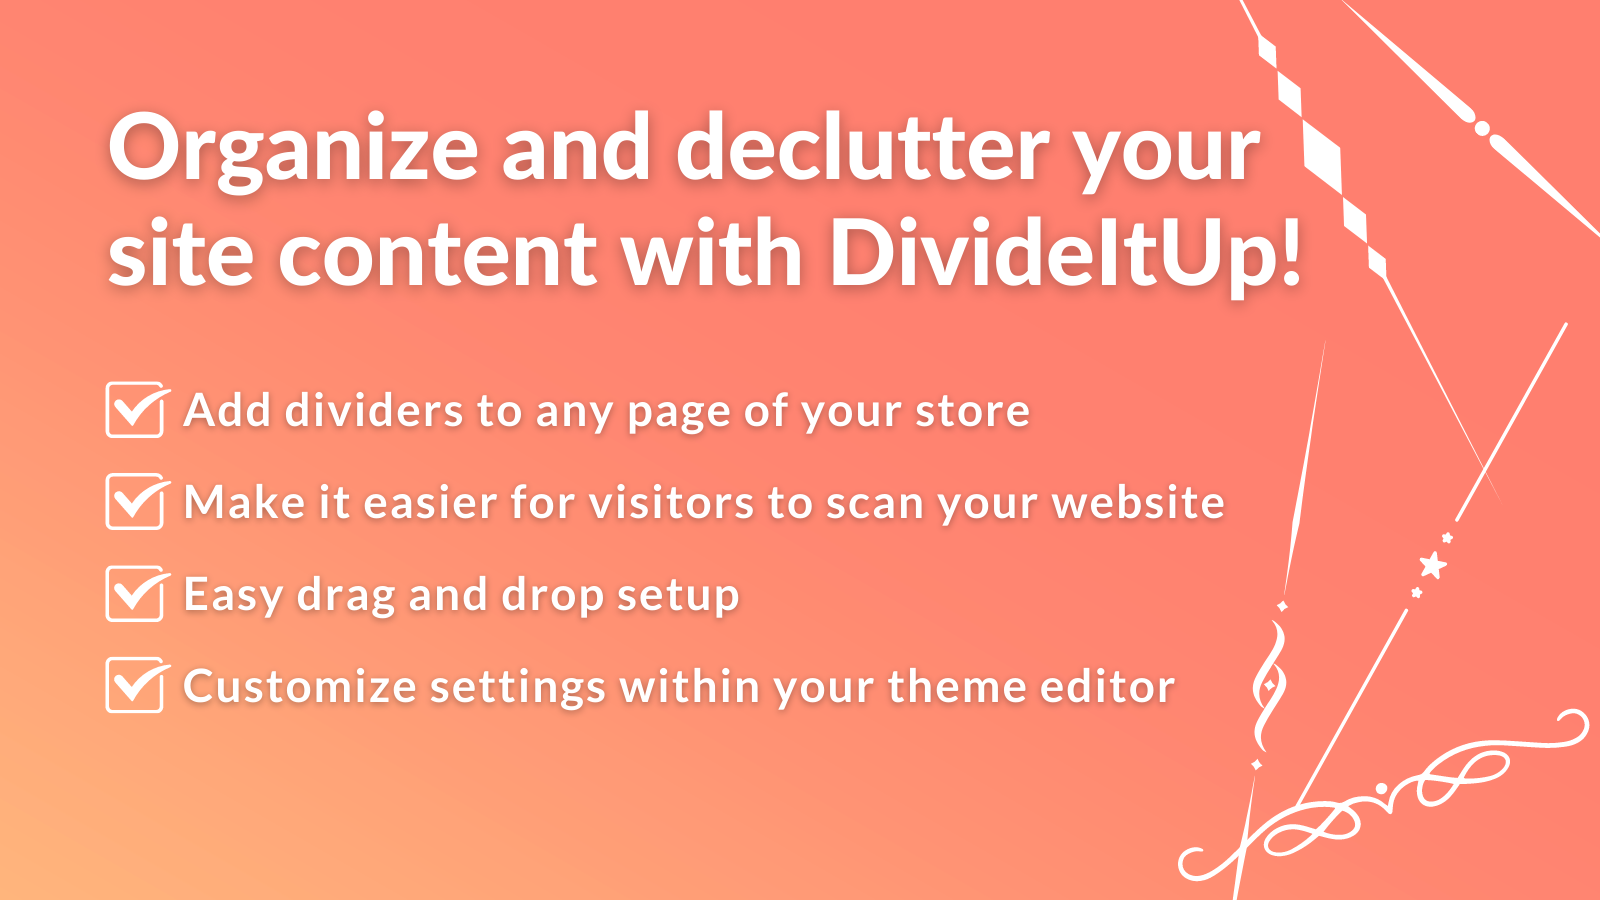 Organize and declutter your site content with DivideItUp!